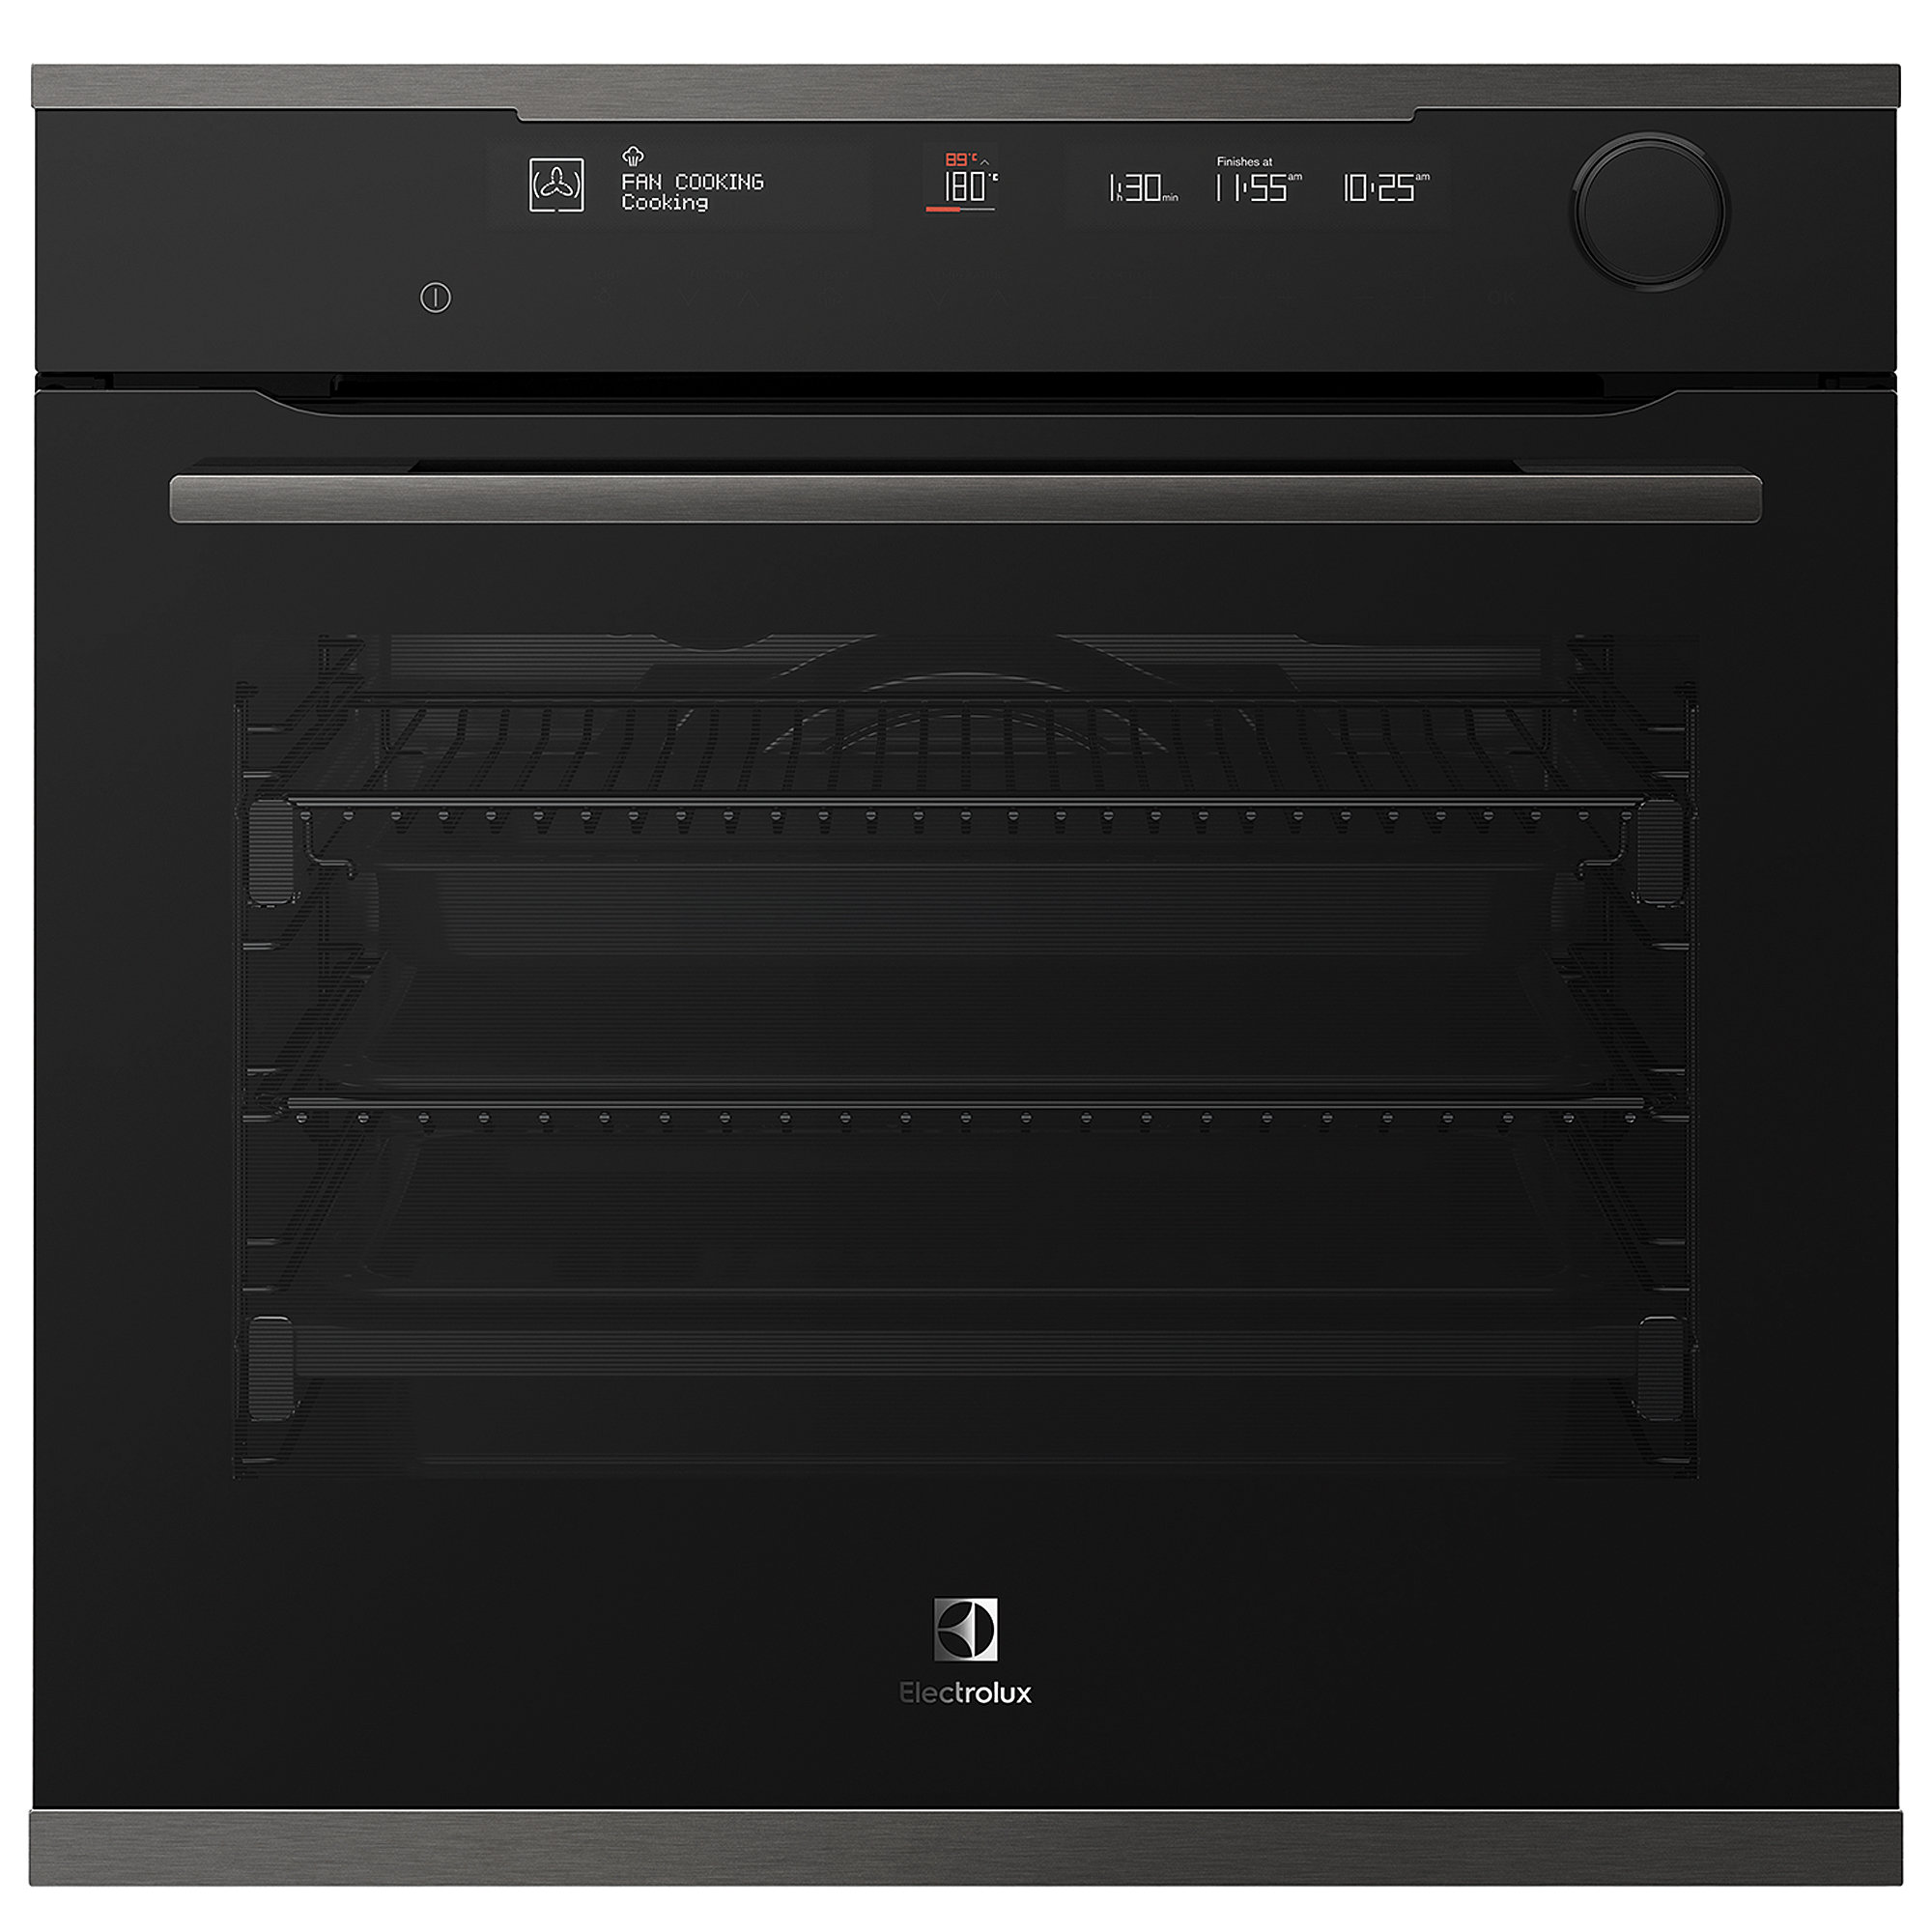 Electrolux Oven 2018